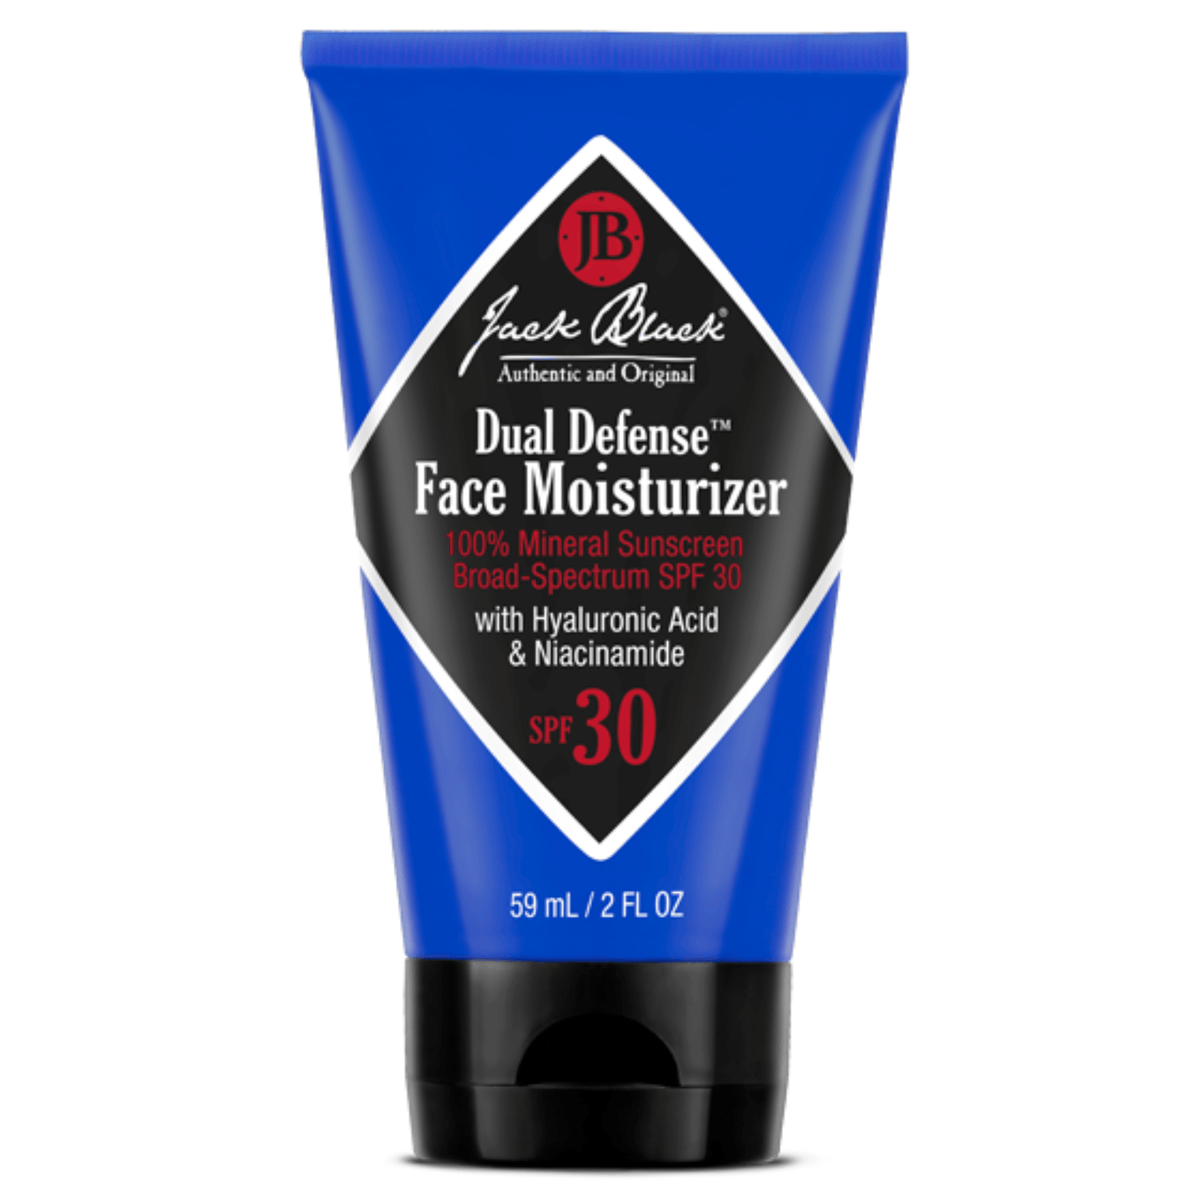 Primary Image of Dual Defense Face Moisturizer SPF 30